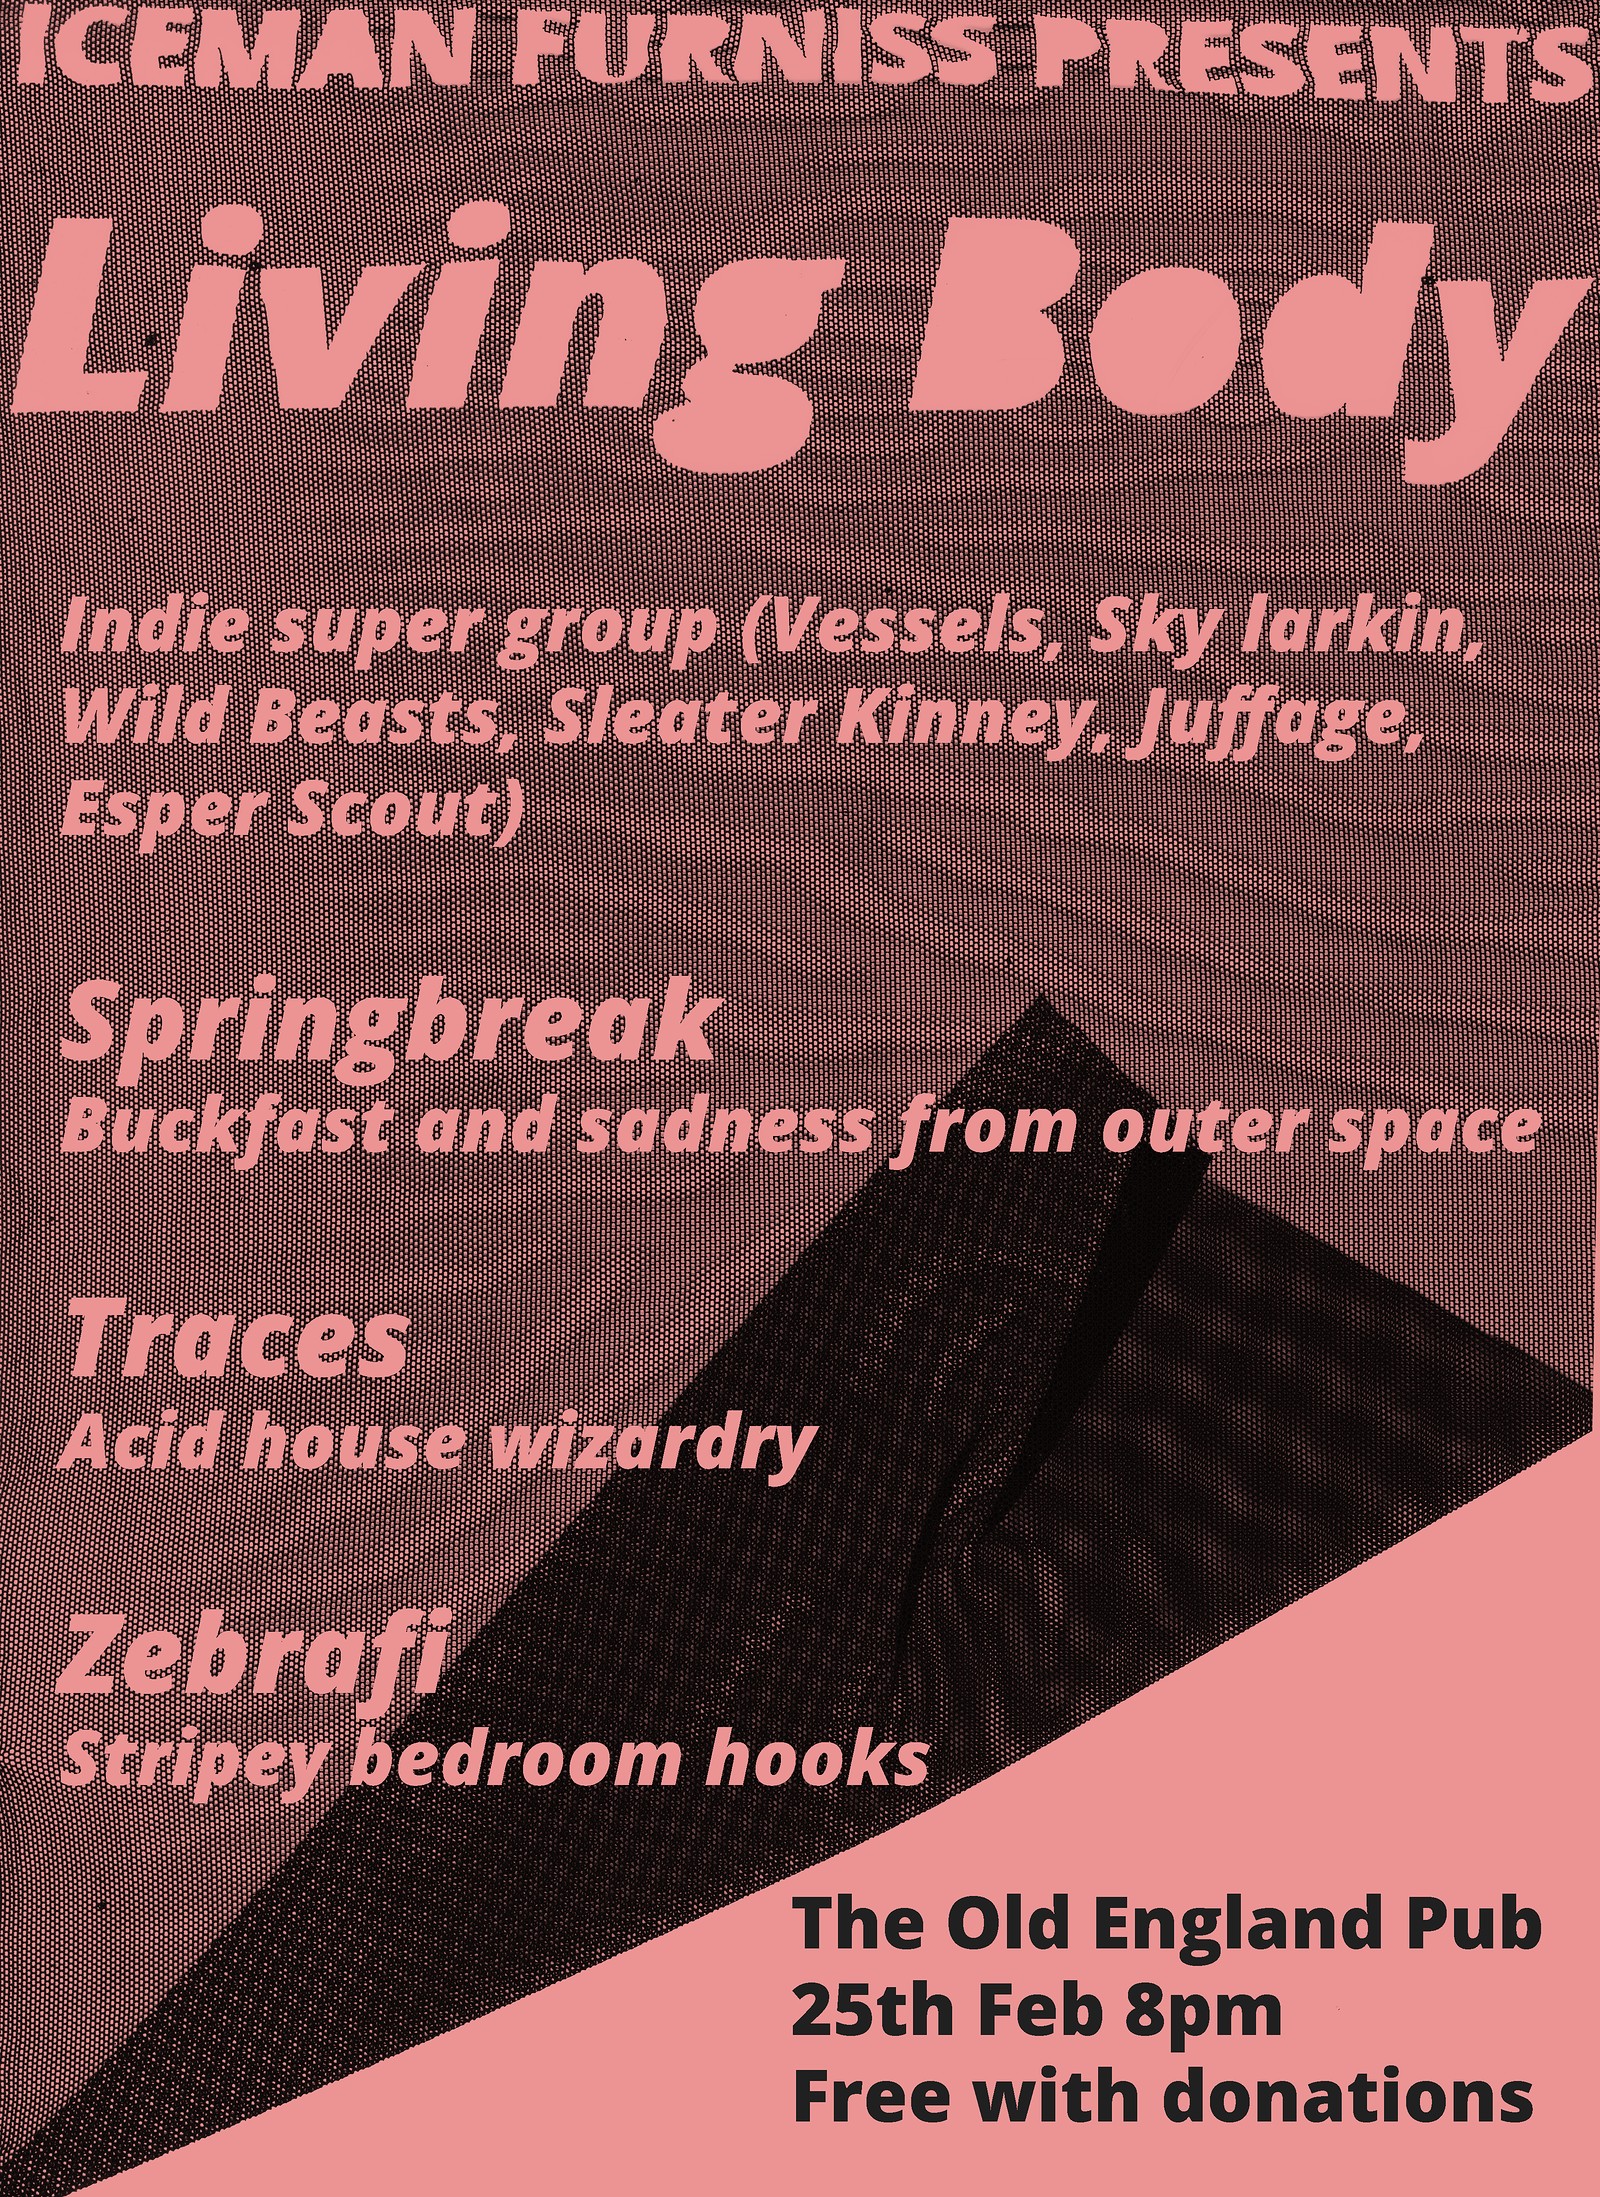 Living Body with Zebrafi, Springbreak, Traces at The Old England Pub